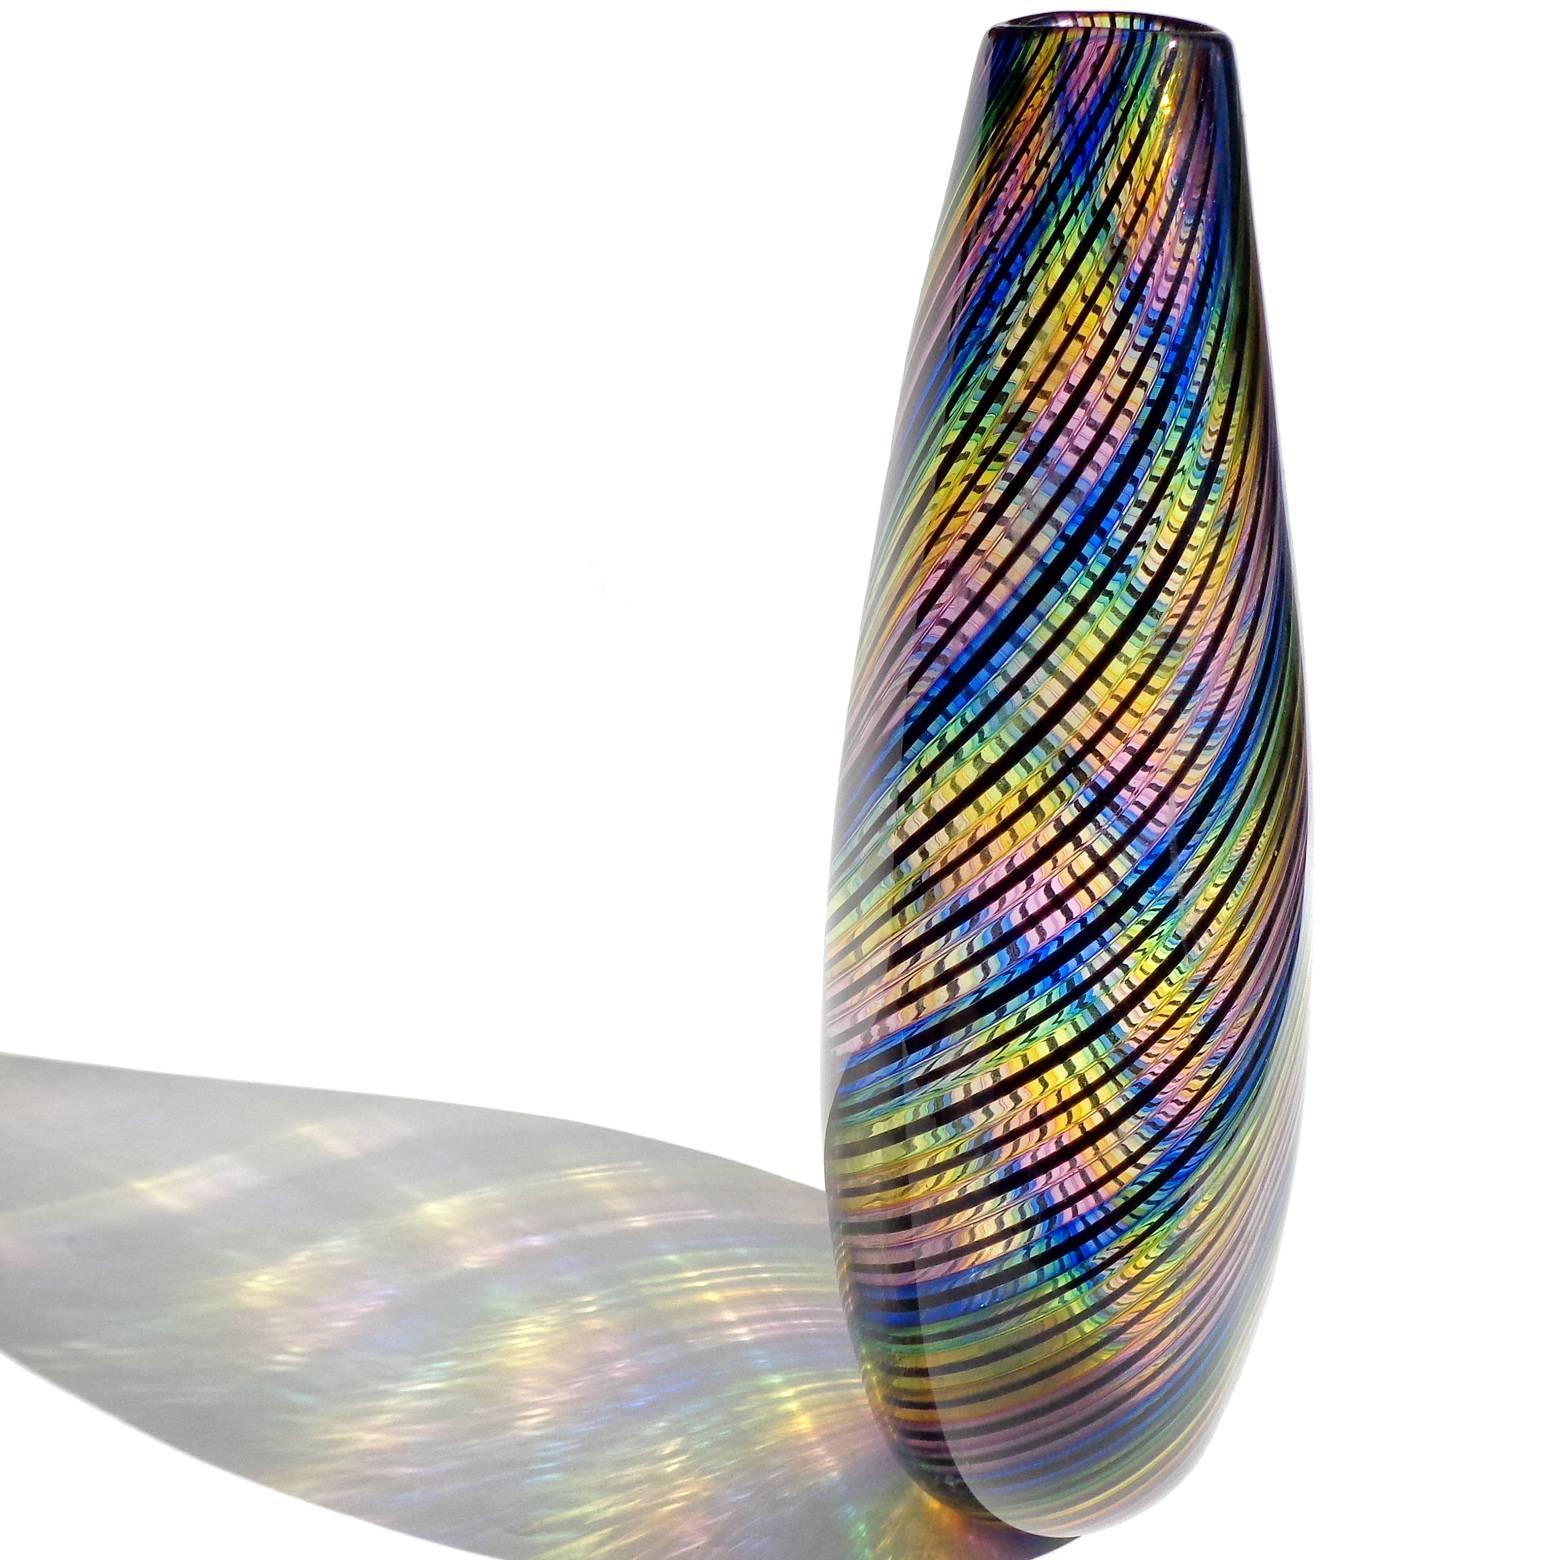 Gorgeous art glass rainbow colors ribbons flower vase. Has blue, green, yellow, pink and black colors. The piece is stamped underneath "SOLA". In the manner of Murano Italy glass. Unsure of age, but believe it is a modern piece. Stunning!
